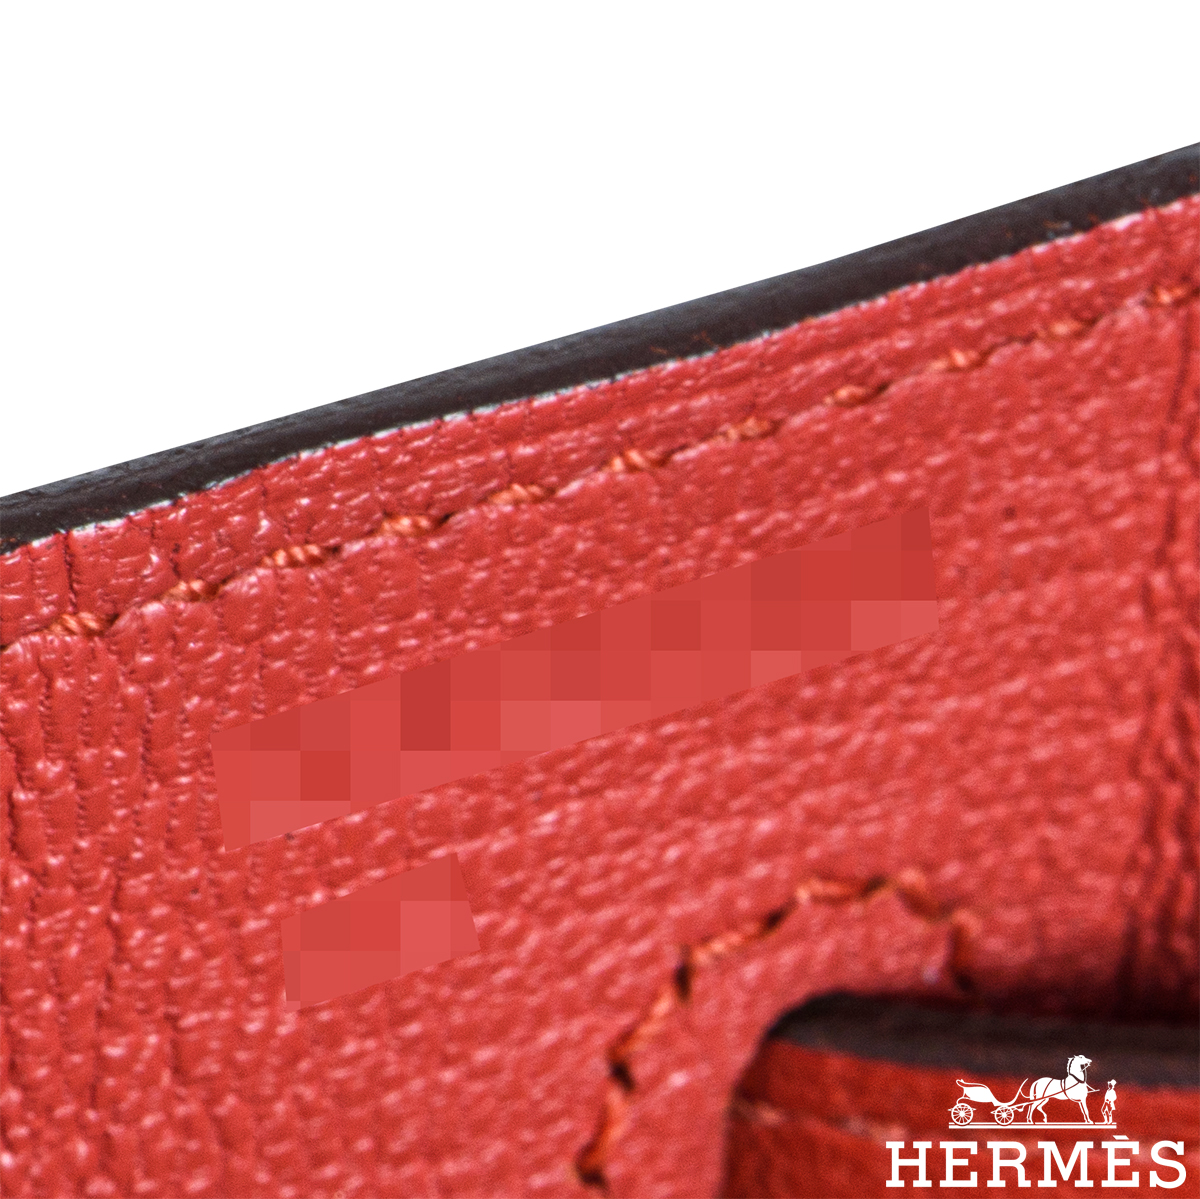 Hermès Kelly 35cm Clemence Rogue Tomate GHW